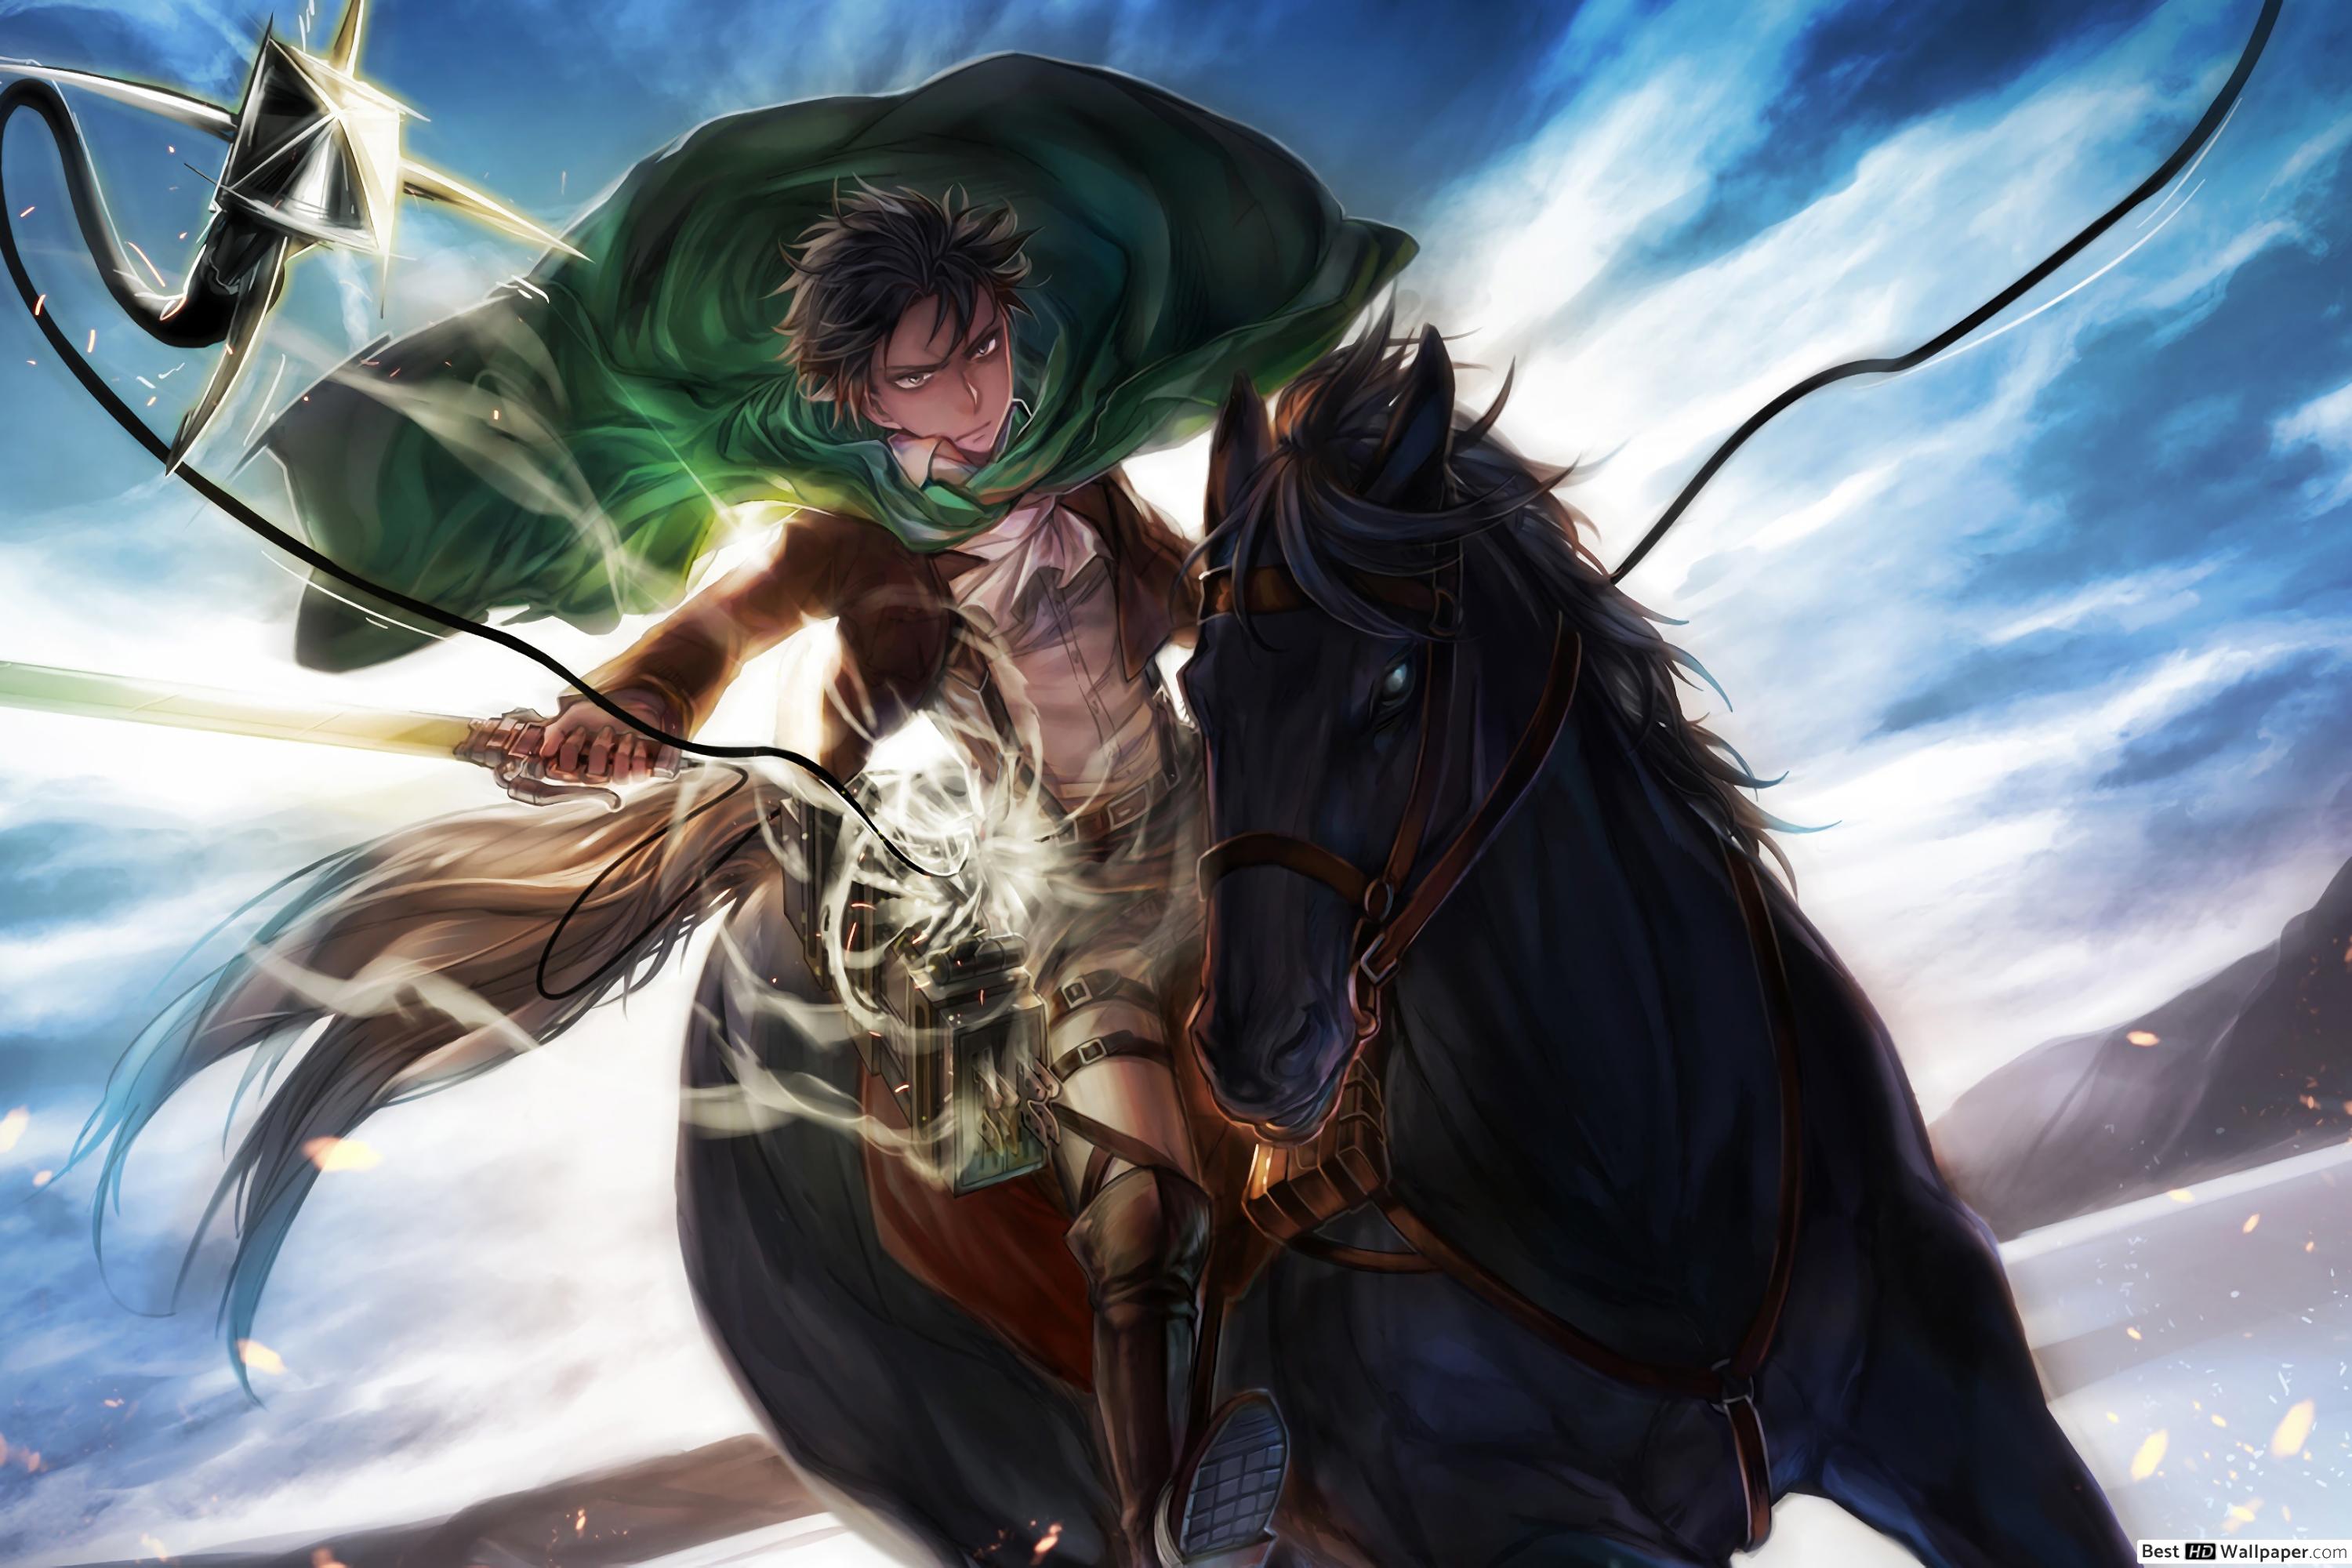 attack on titan wallpaper,cg artwork,games,fictional character,action adventure game,illustration